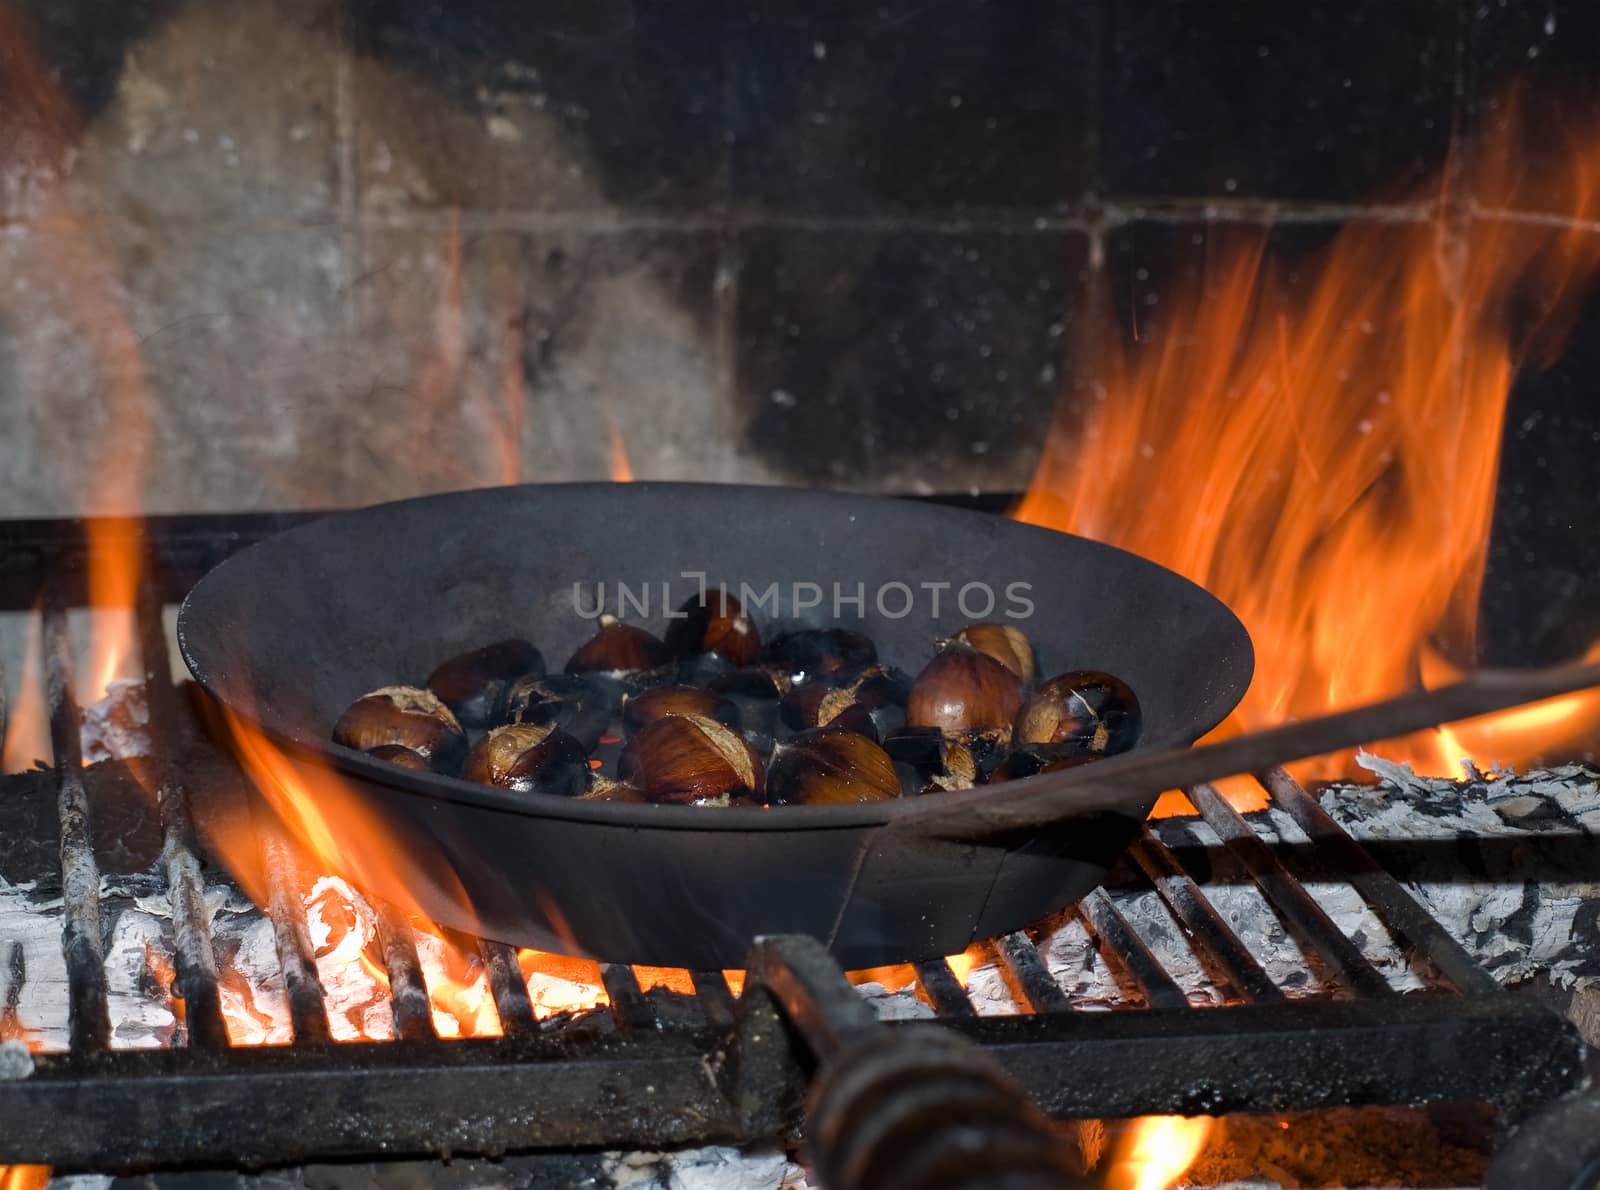 roasted chestnuts in the fireplace